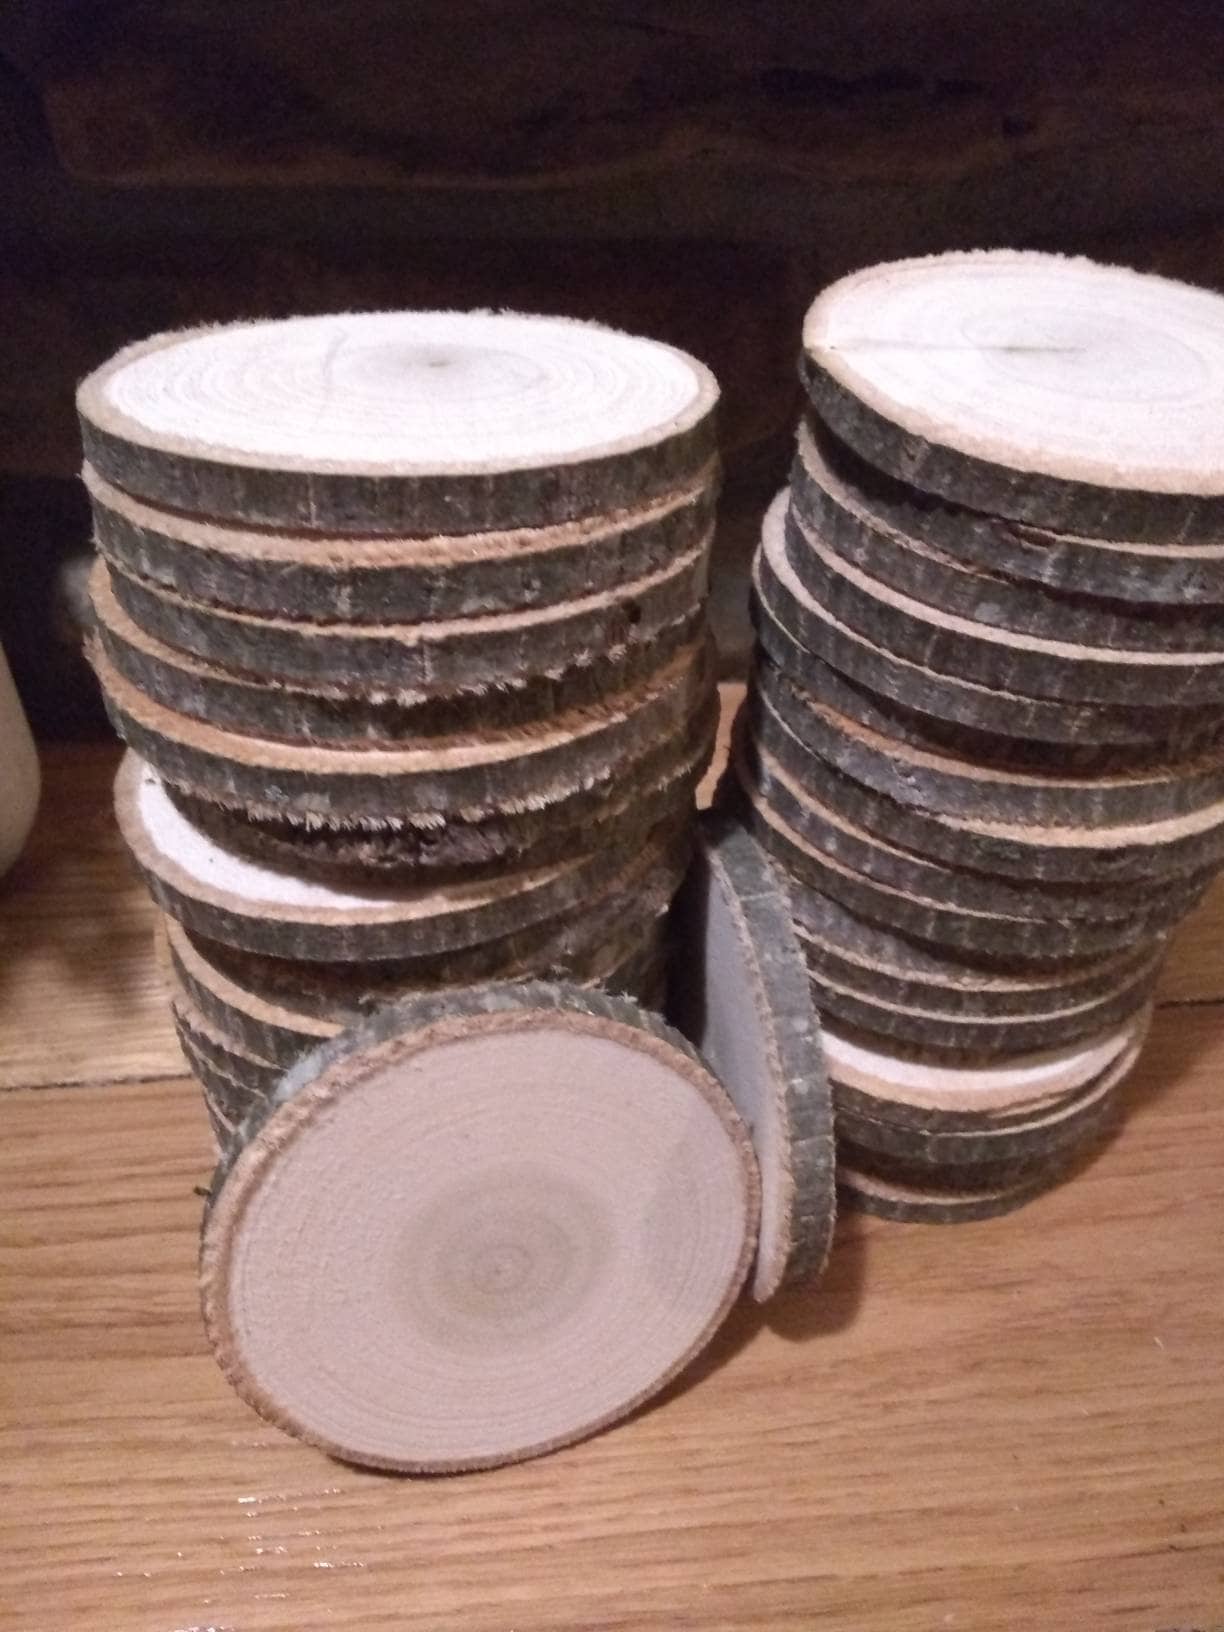 Dried IMPERFECT Unfinished Wood Slices for Crafts, Wood Slice, 3-5 Inch  Wide, Set of 10 